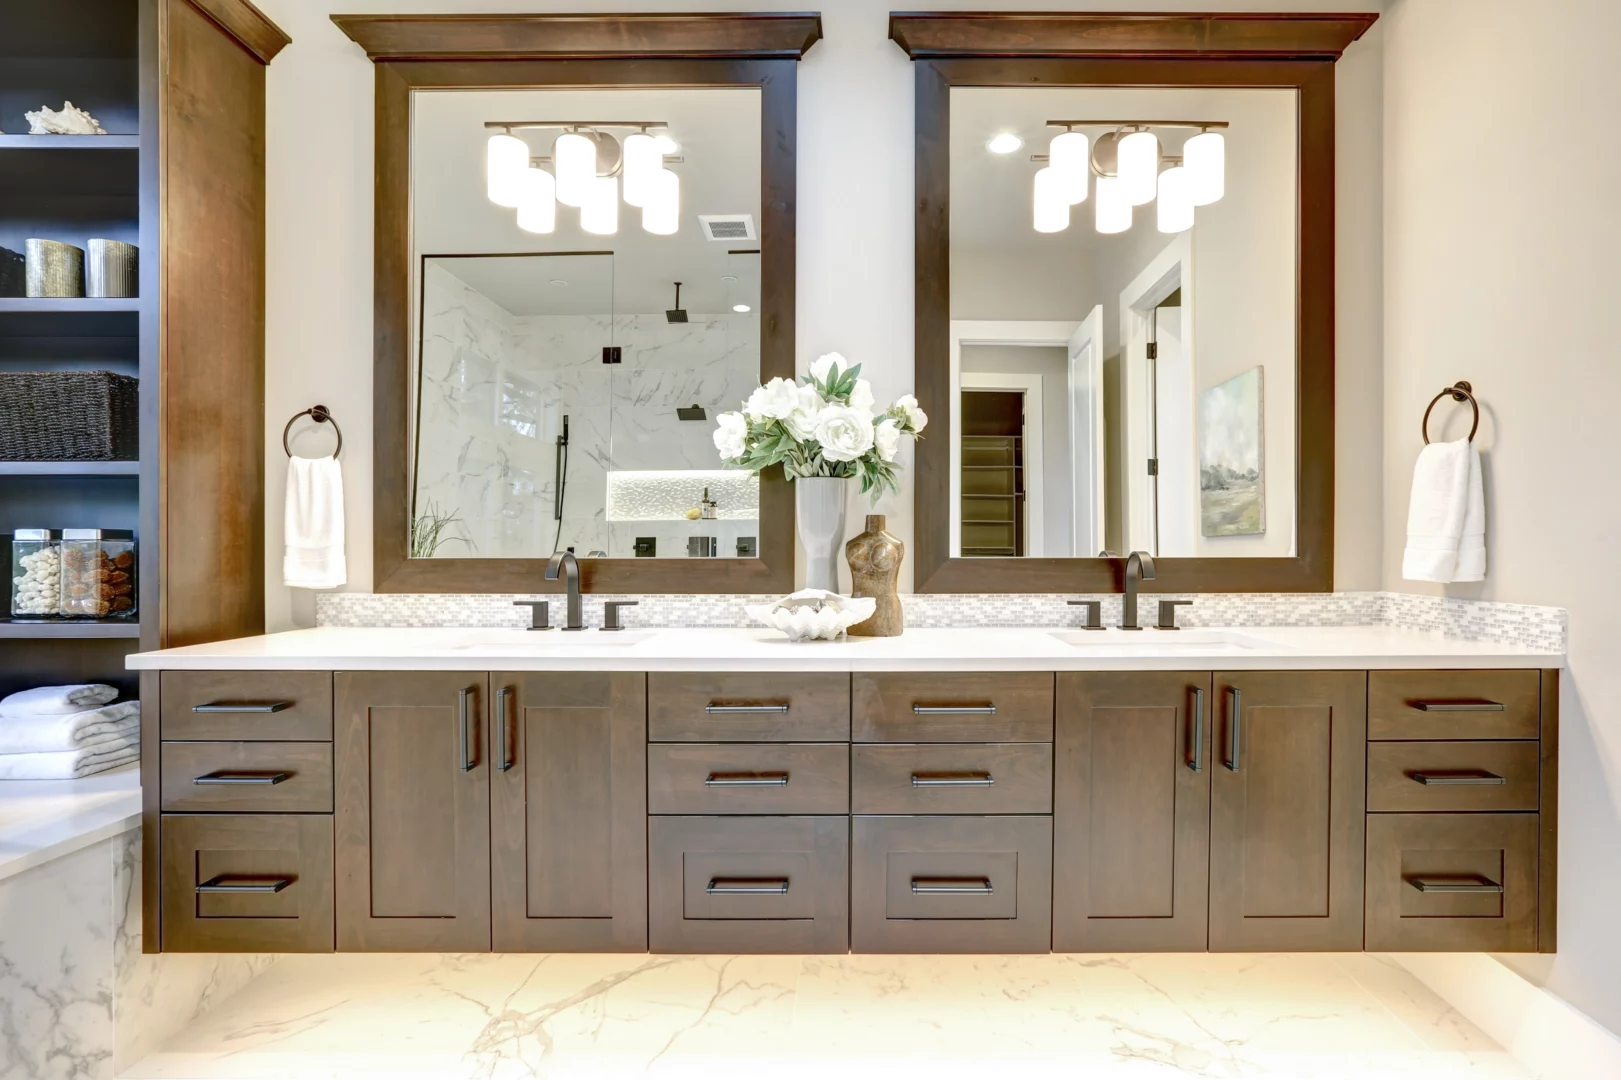 Hardwood cabinetry and mirror framing featured in a modern, beautiful bathroom. Bathroom Remodel Inspiration 